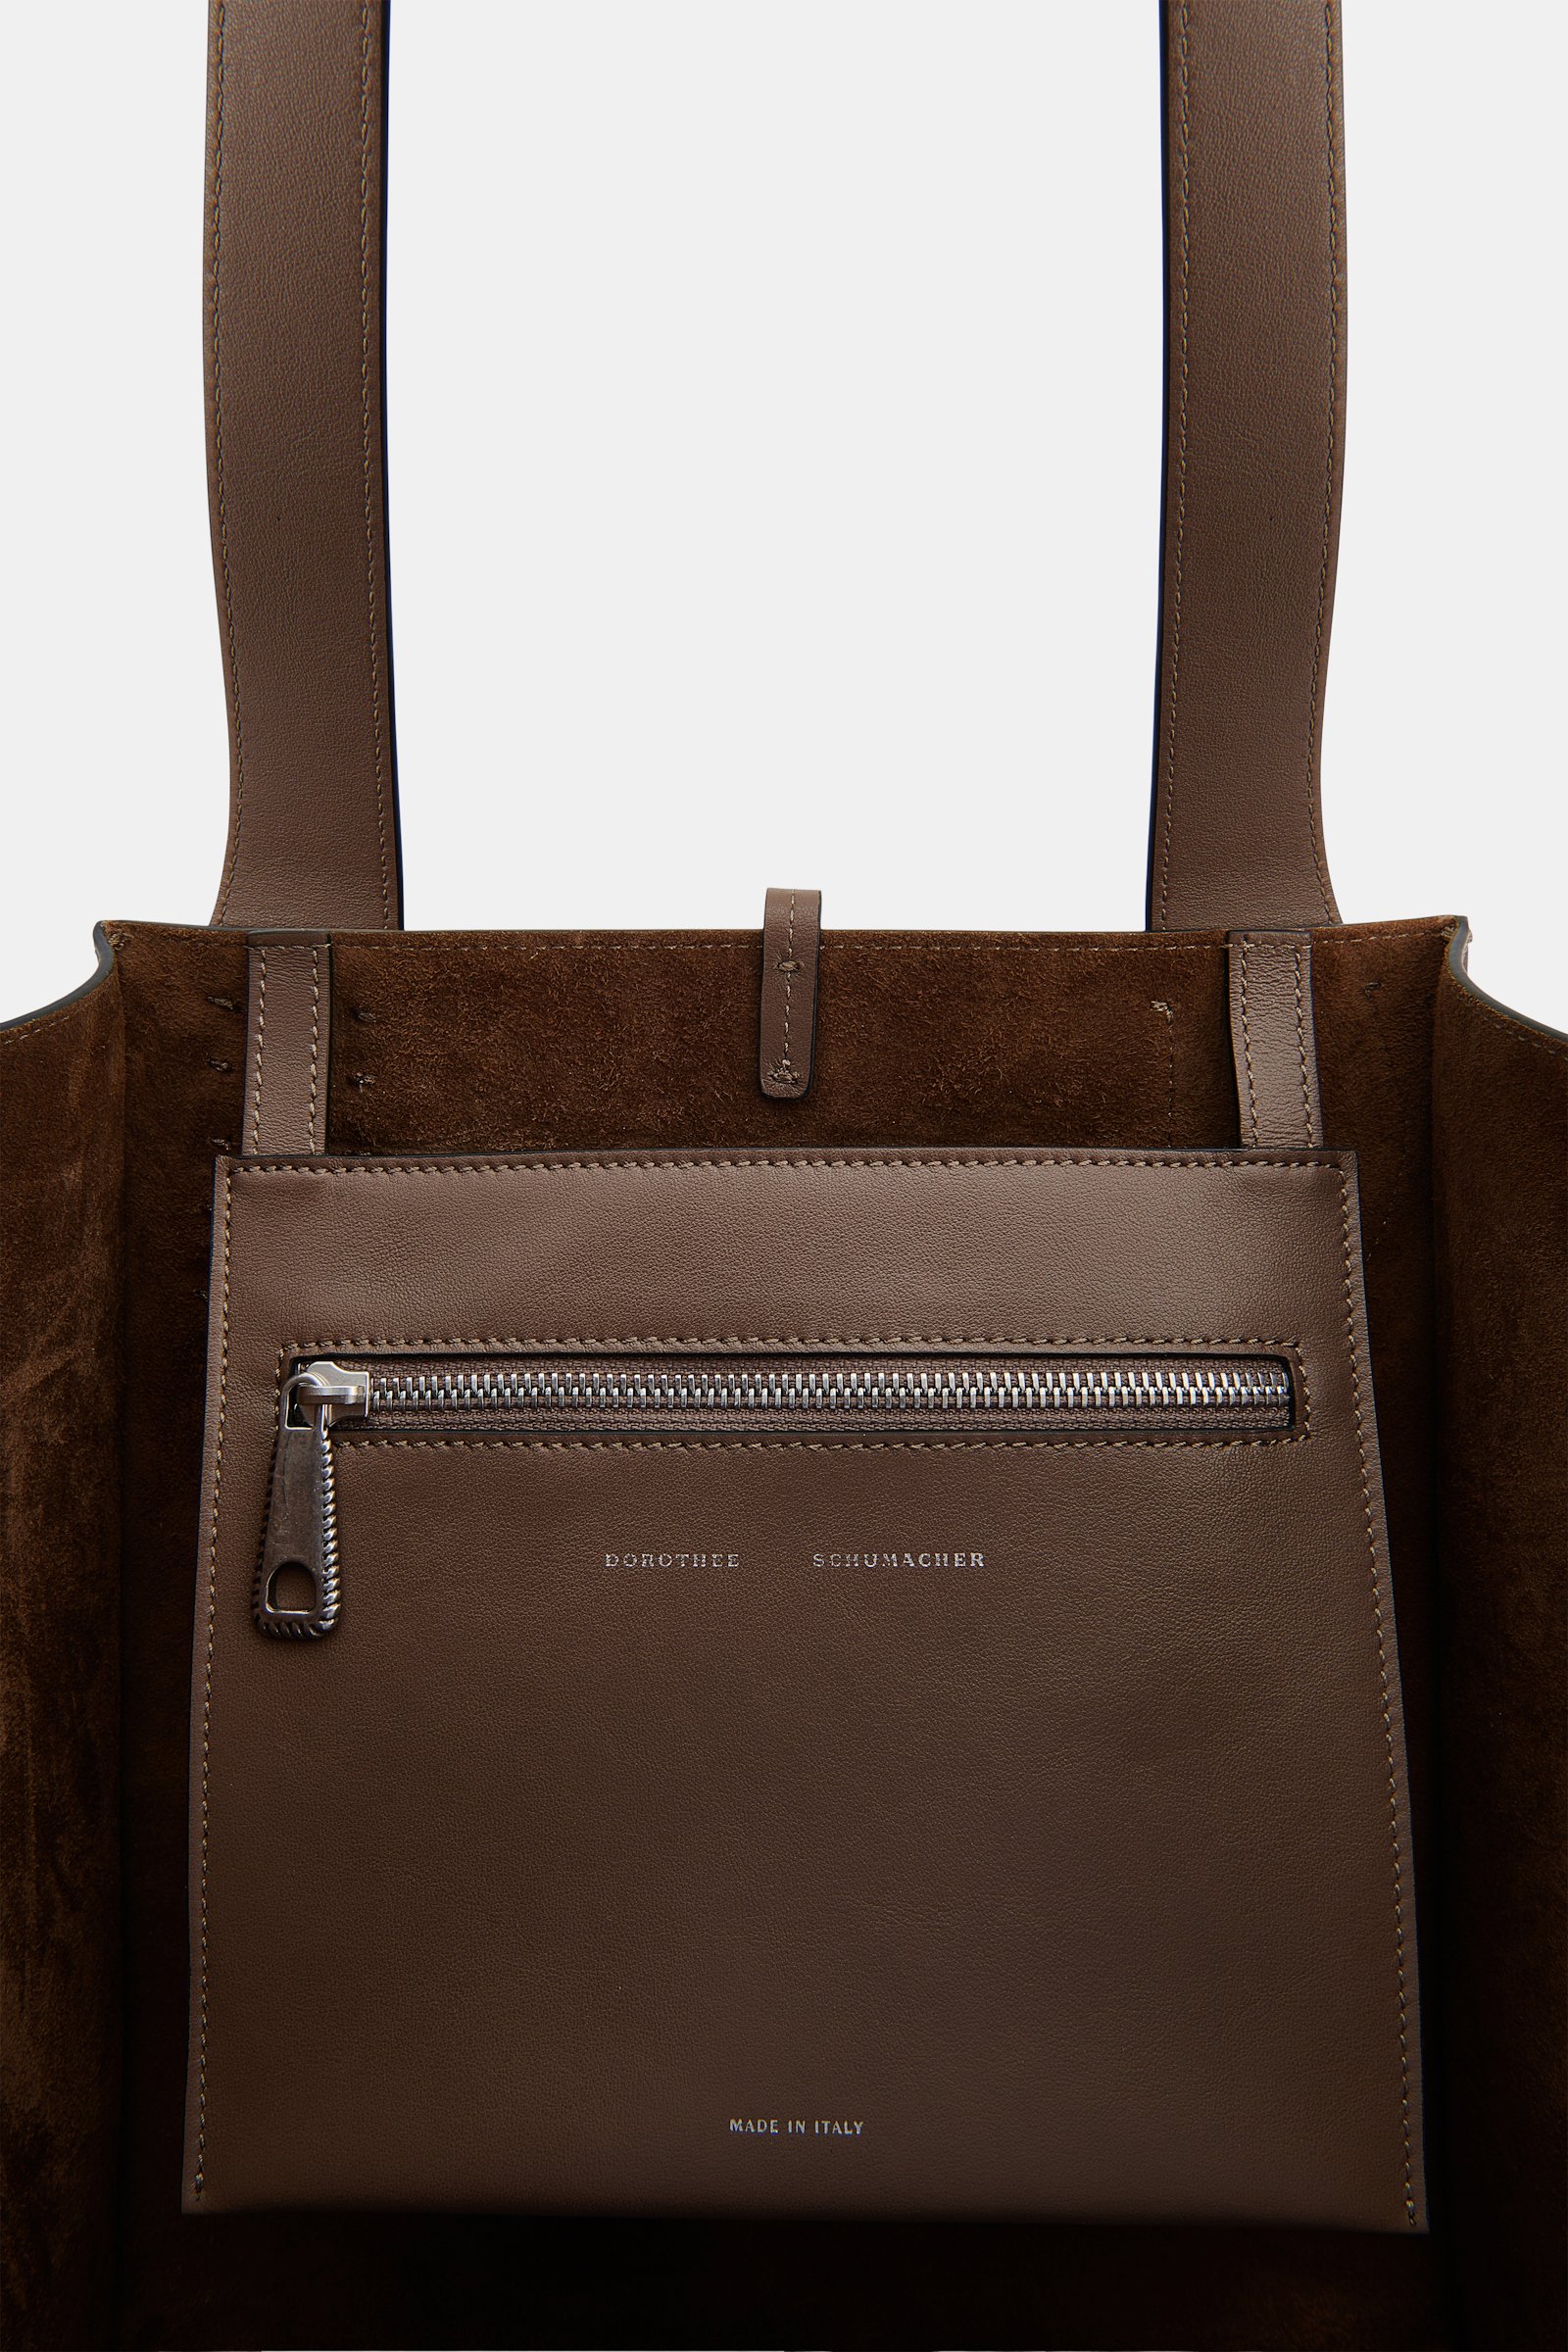 Dorothee Schumacher Tote Bag in soft calf leather with D-ring hardware taupe